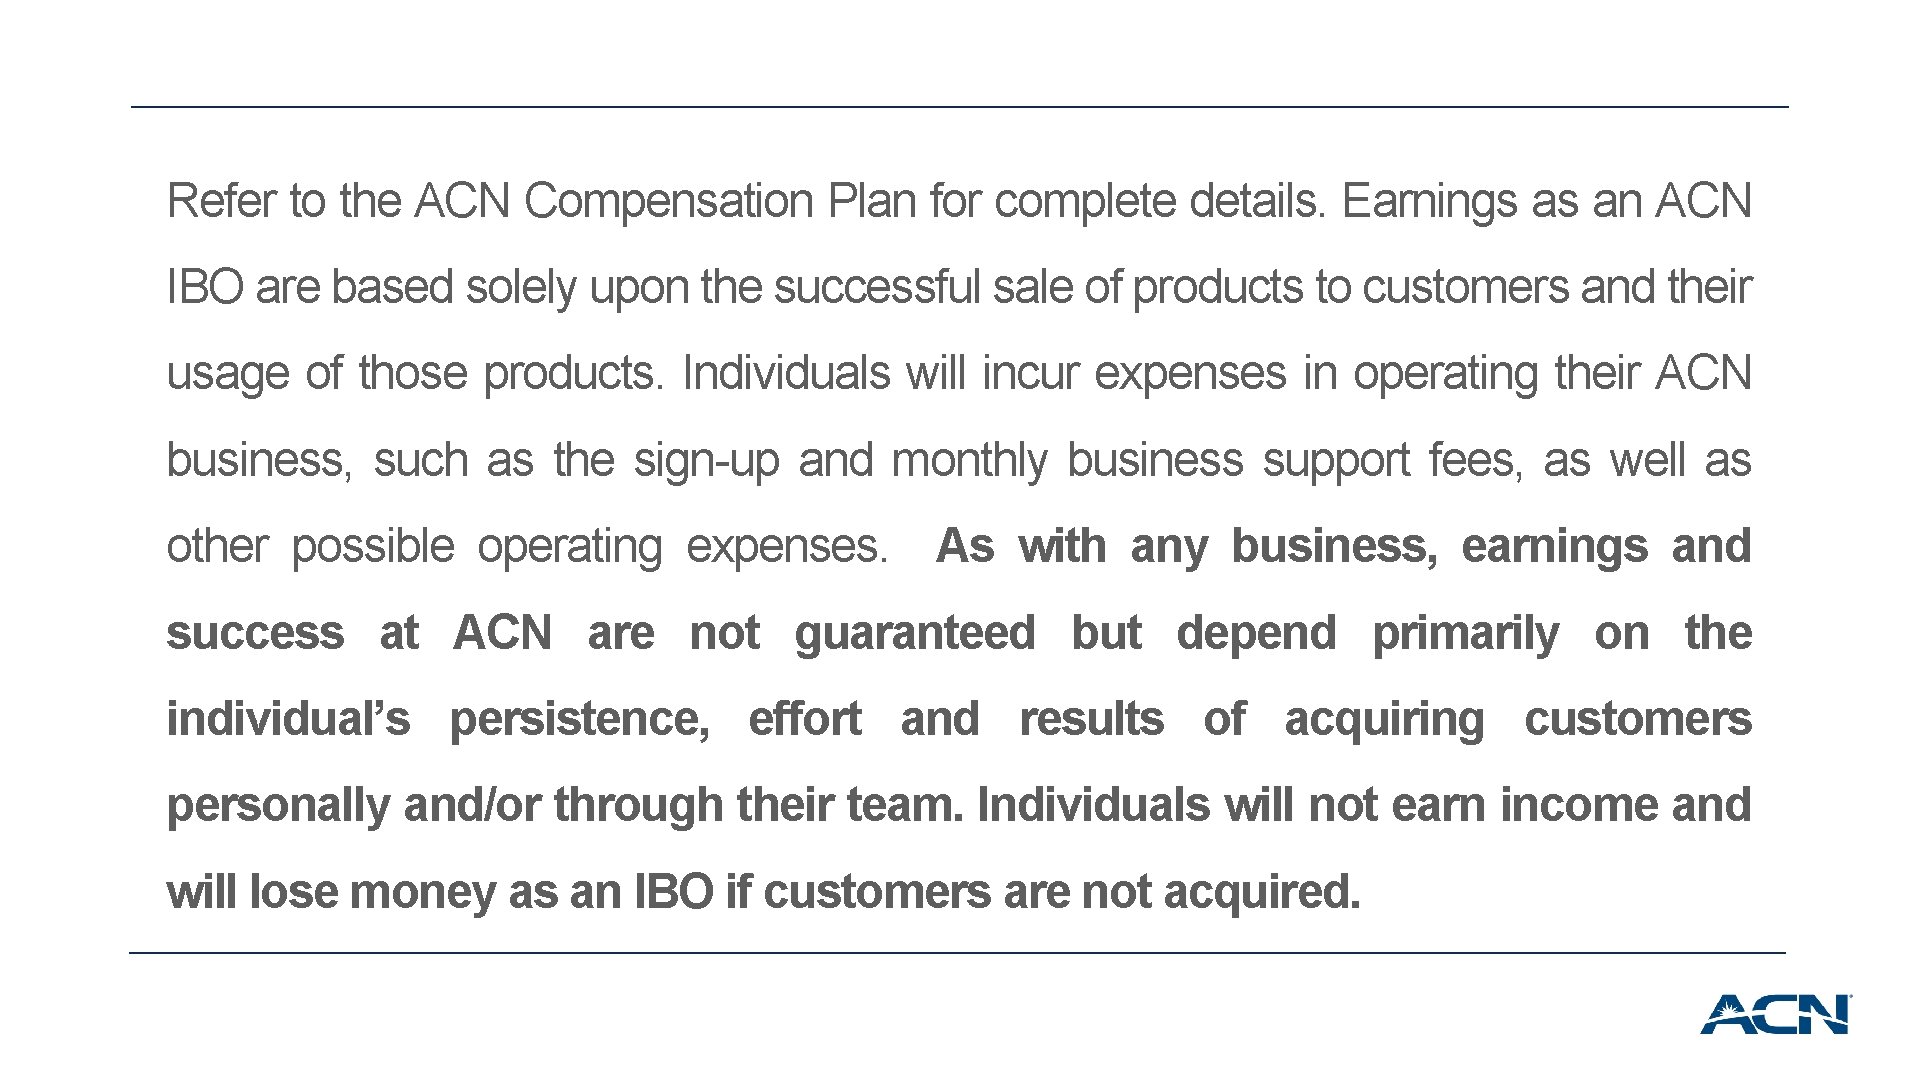 Refer to the ACN Compensation Plan for complete details. Earnings as an ACN IBO